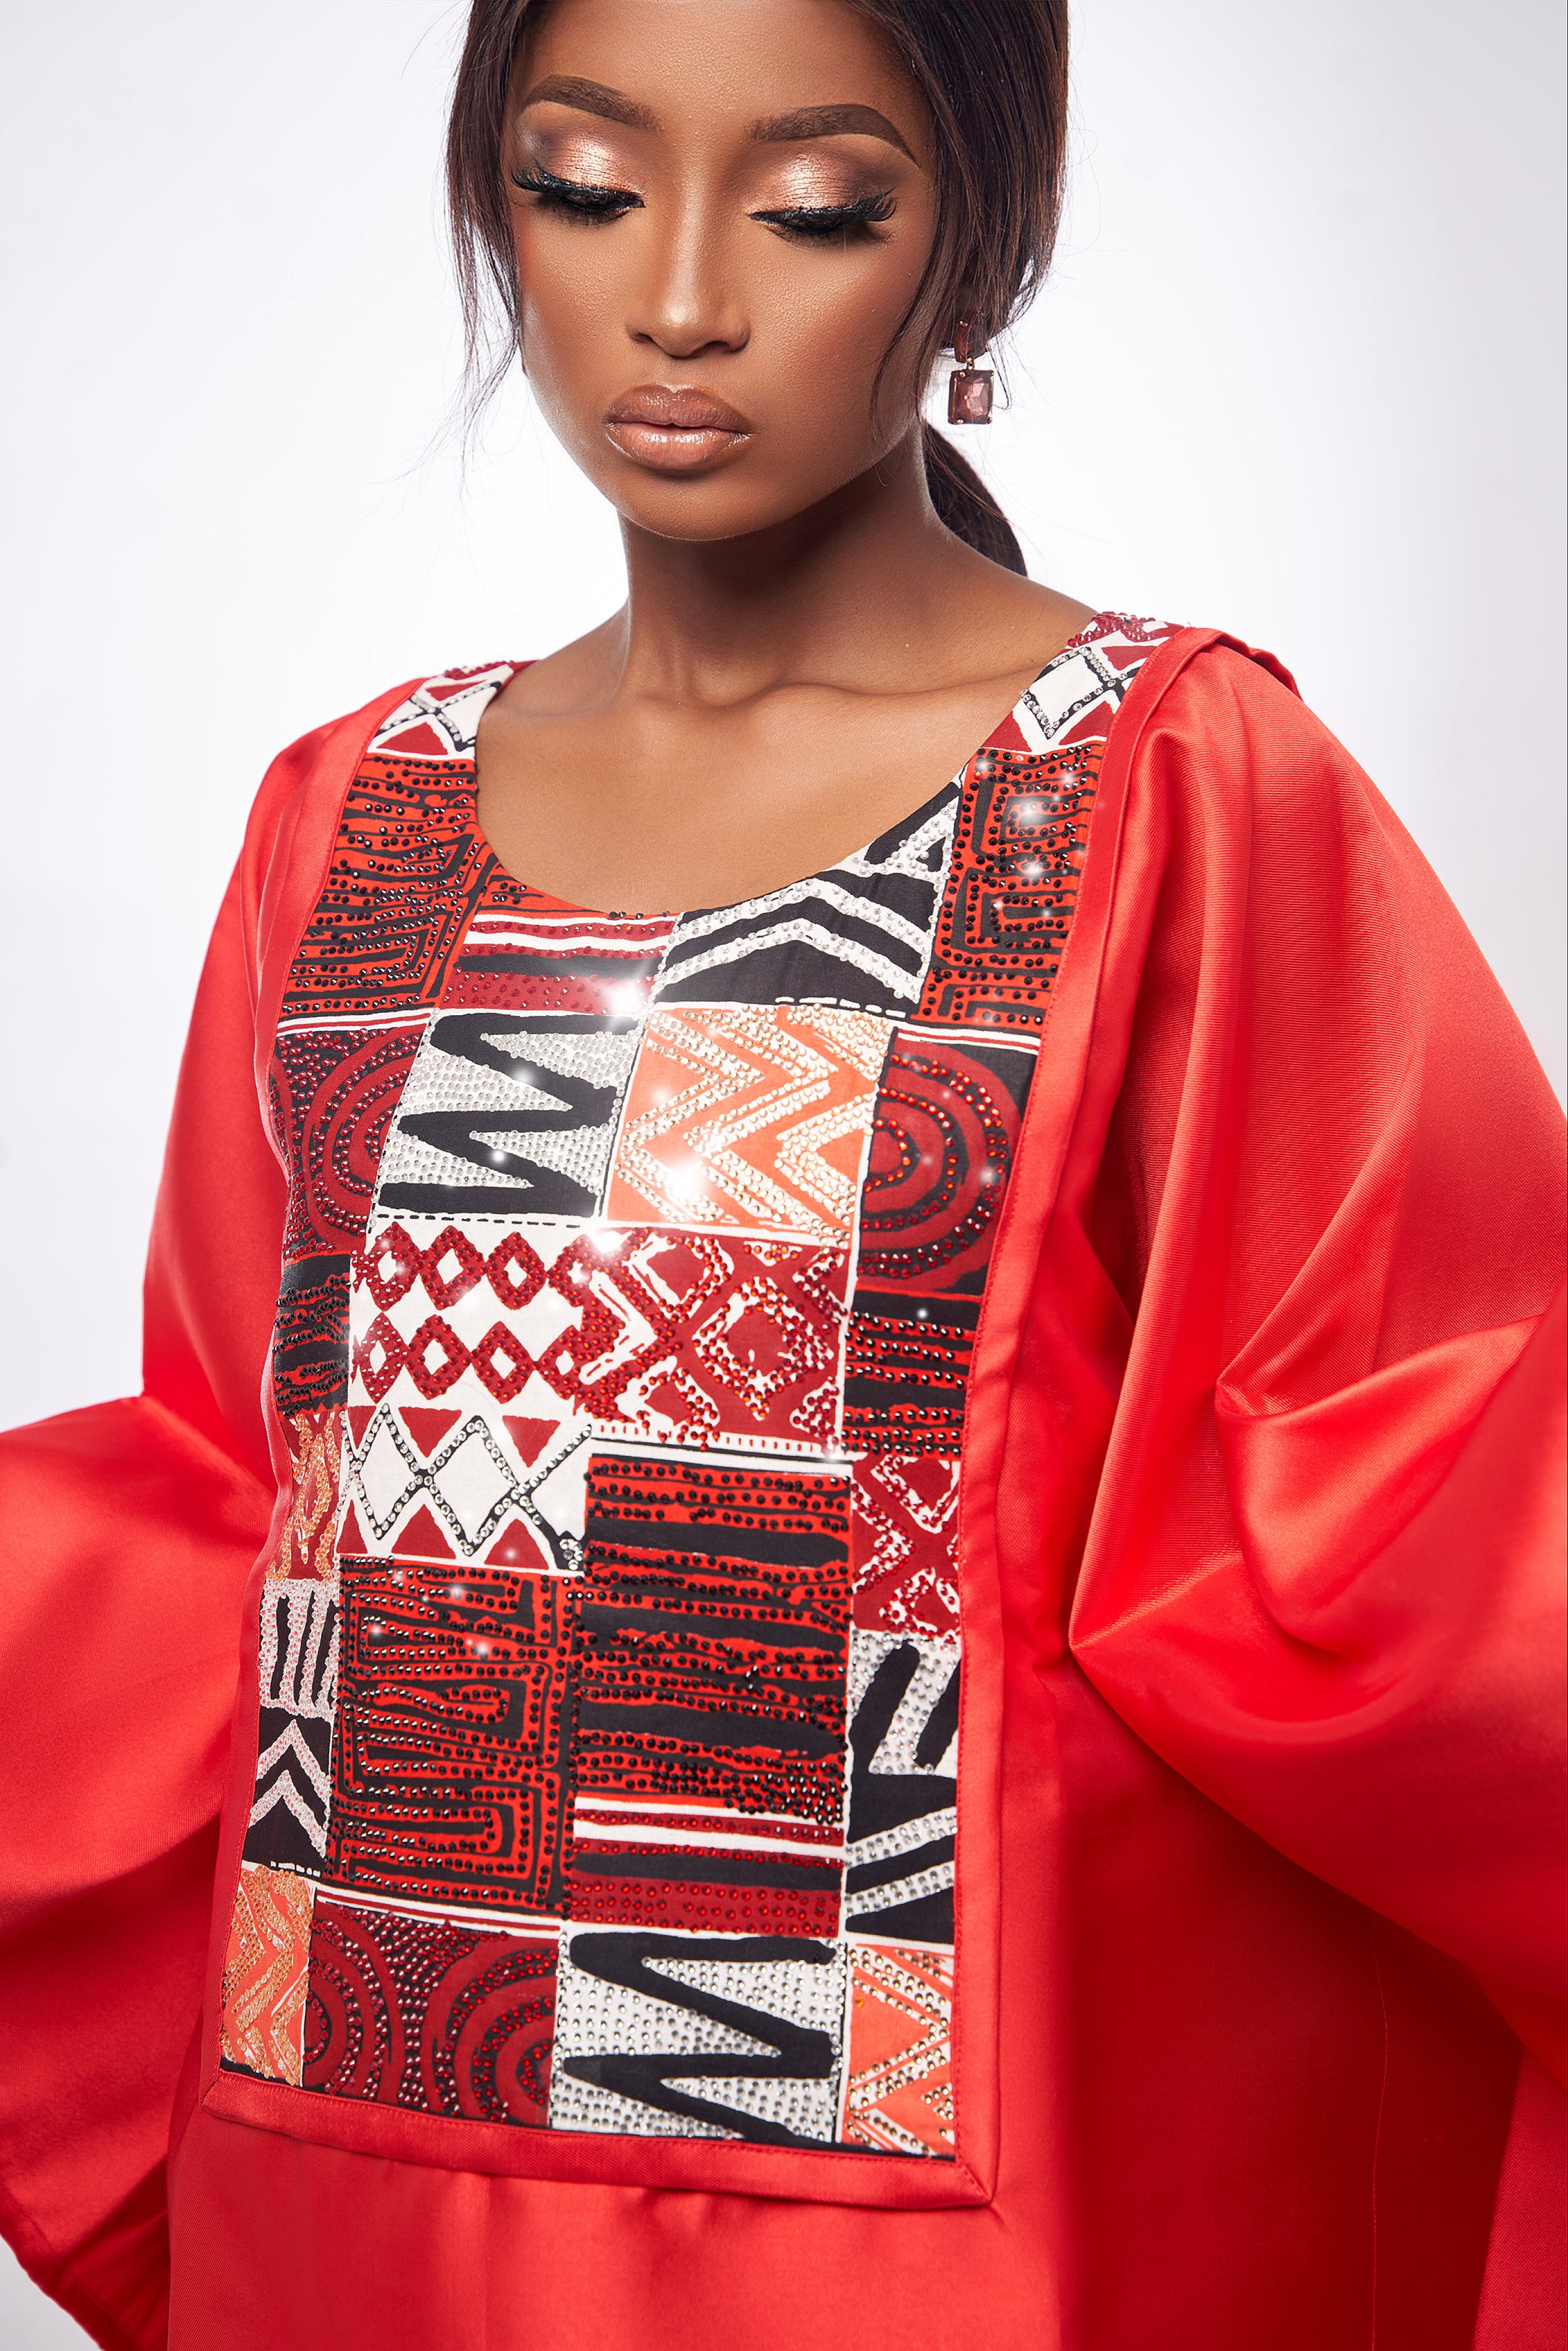 Red Satin and African Print Dress Boubou